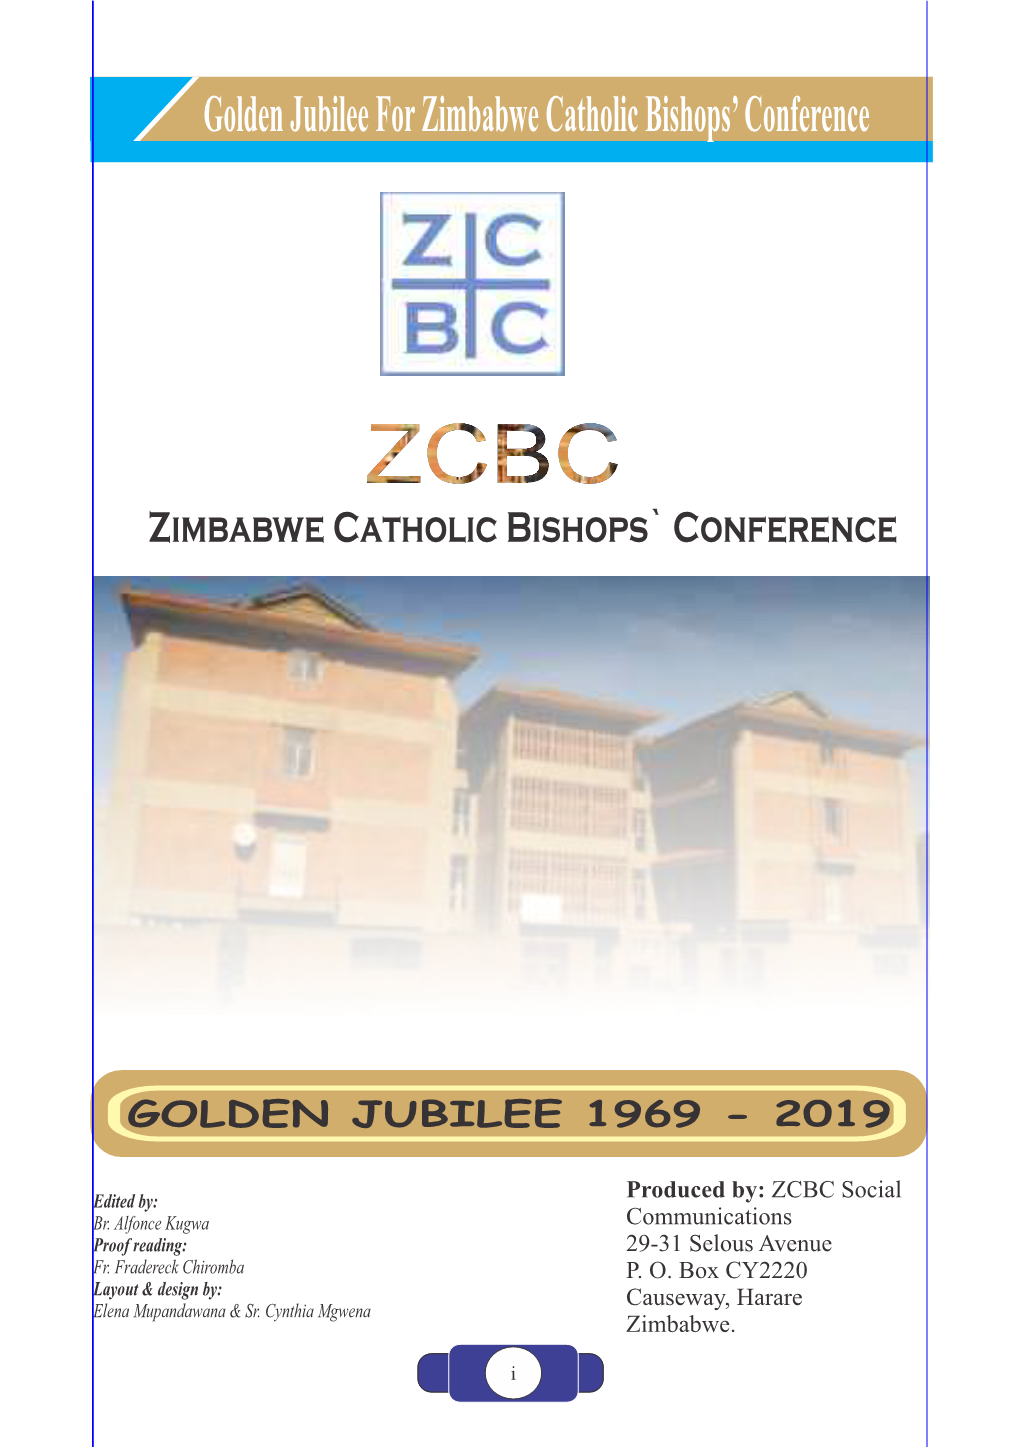 ZCBC GOLDEN JUBILEE BOOKLET New.Cdr